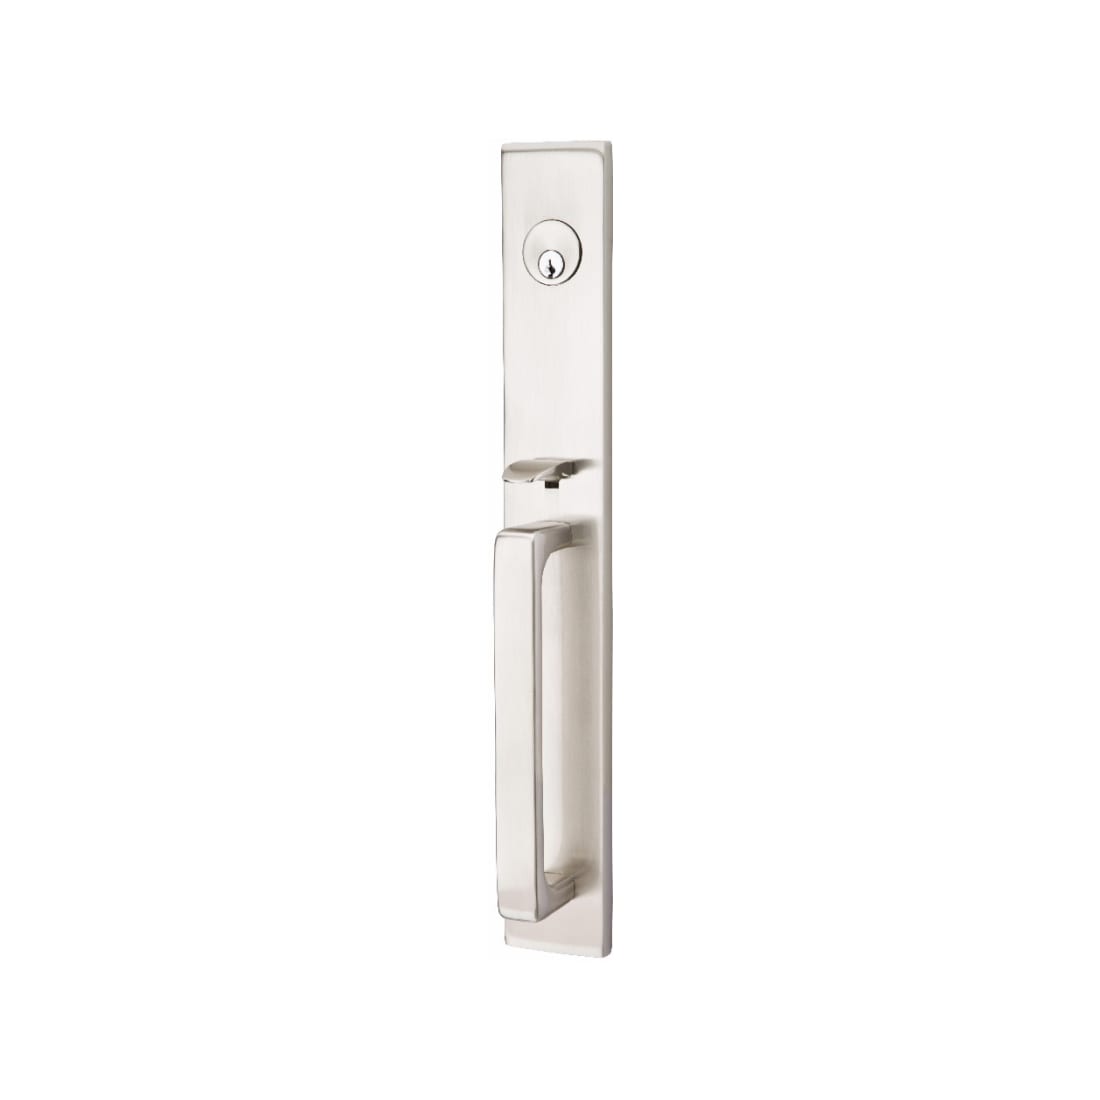 EMTEK Mormont Mortise Entry Set with Matching Finish Triton Lever Choice  of Left/Right Handing Available in Finishes F20334750TRTRHUS26 Rig 